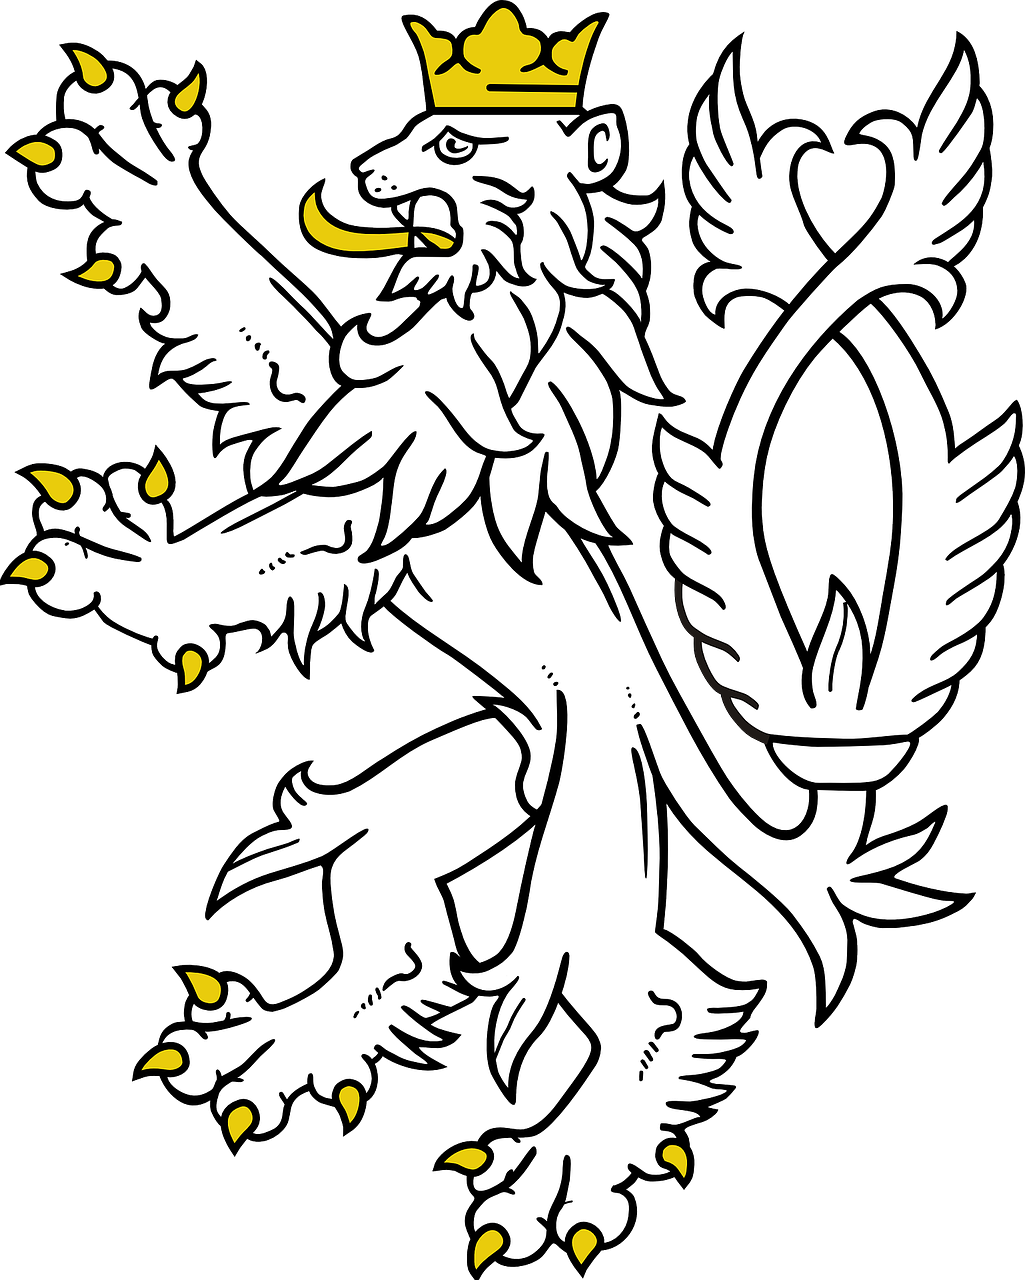 rampant,lion,heraldry,scottish,scotland,coat of arms,crown,free vector graphics,free pictures, free photos, free images, royalty free, free illustrations, public domain